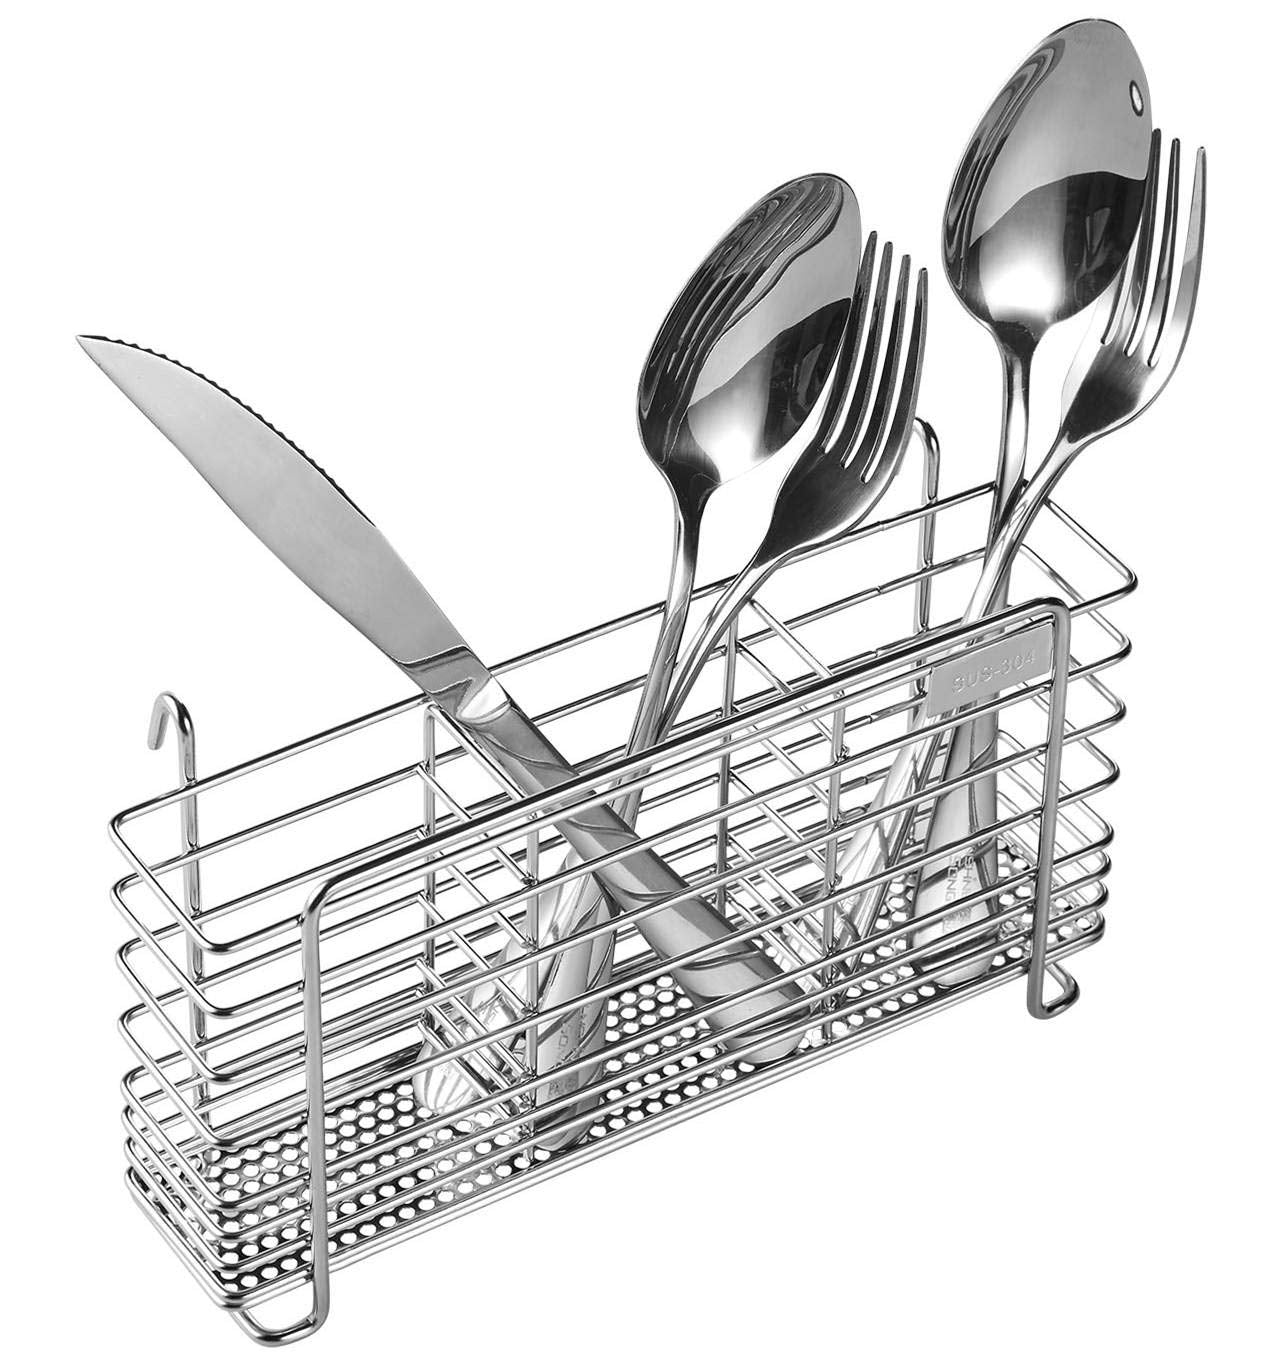 TESOT Adjustable Dish Drying Rack Stainless Steel Over Sink Dish Rack In Sink or On Counter - Rustproof